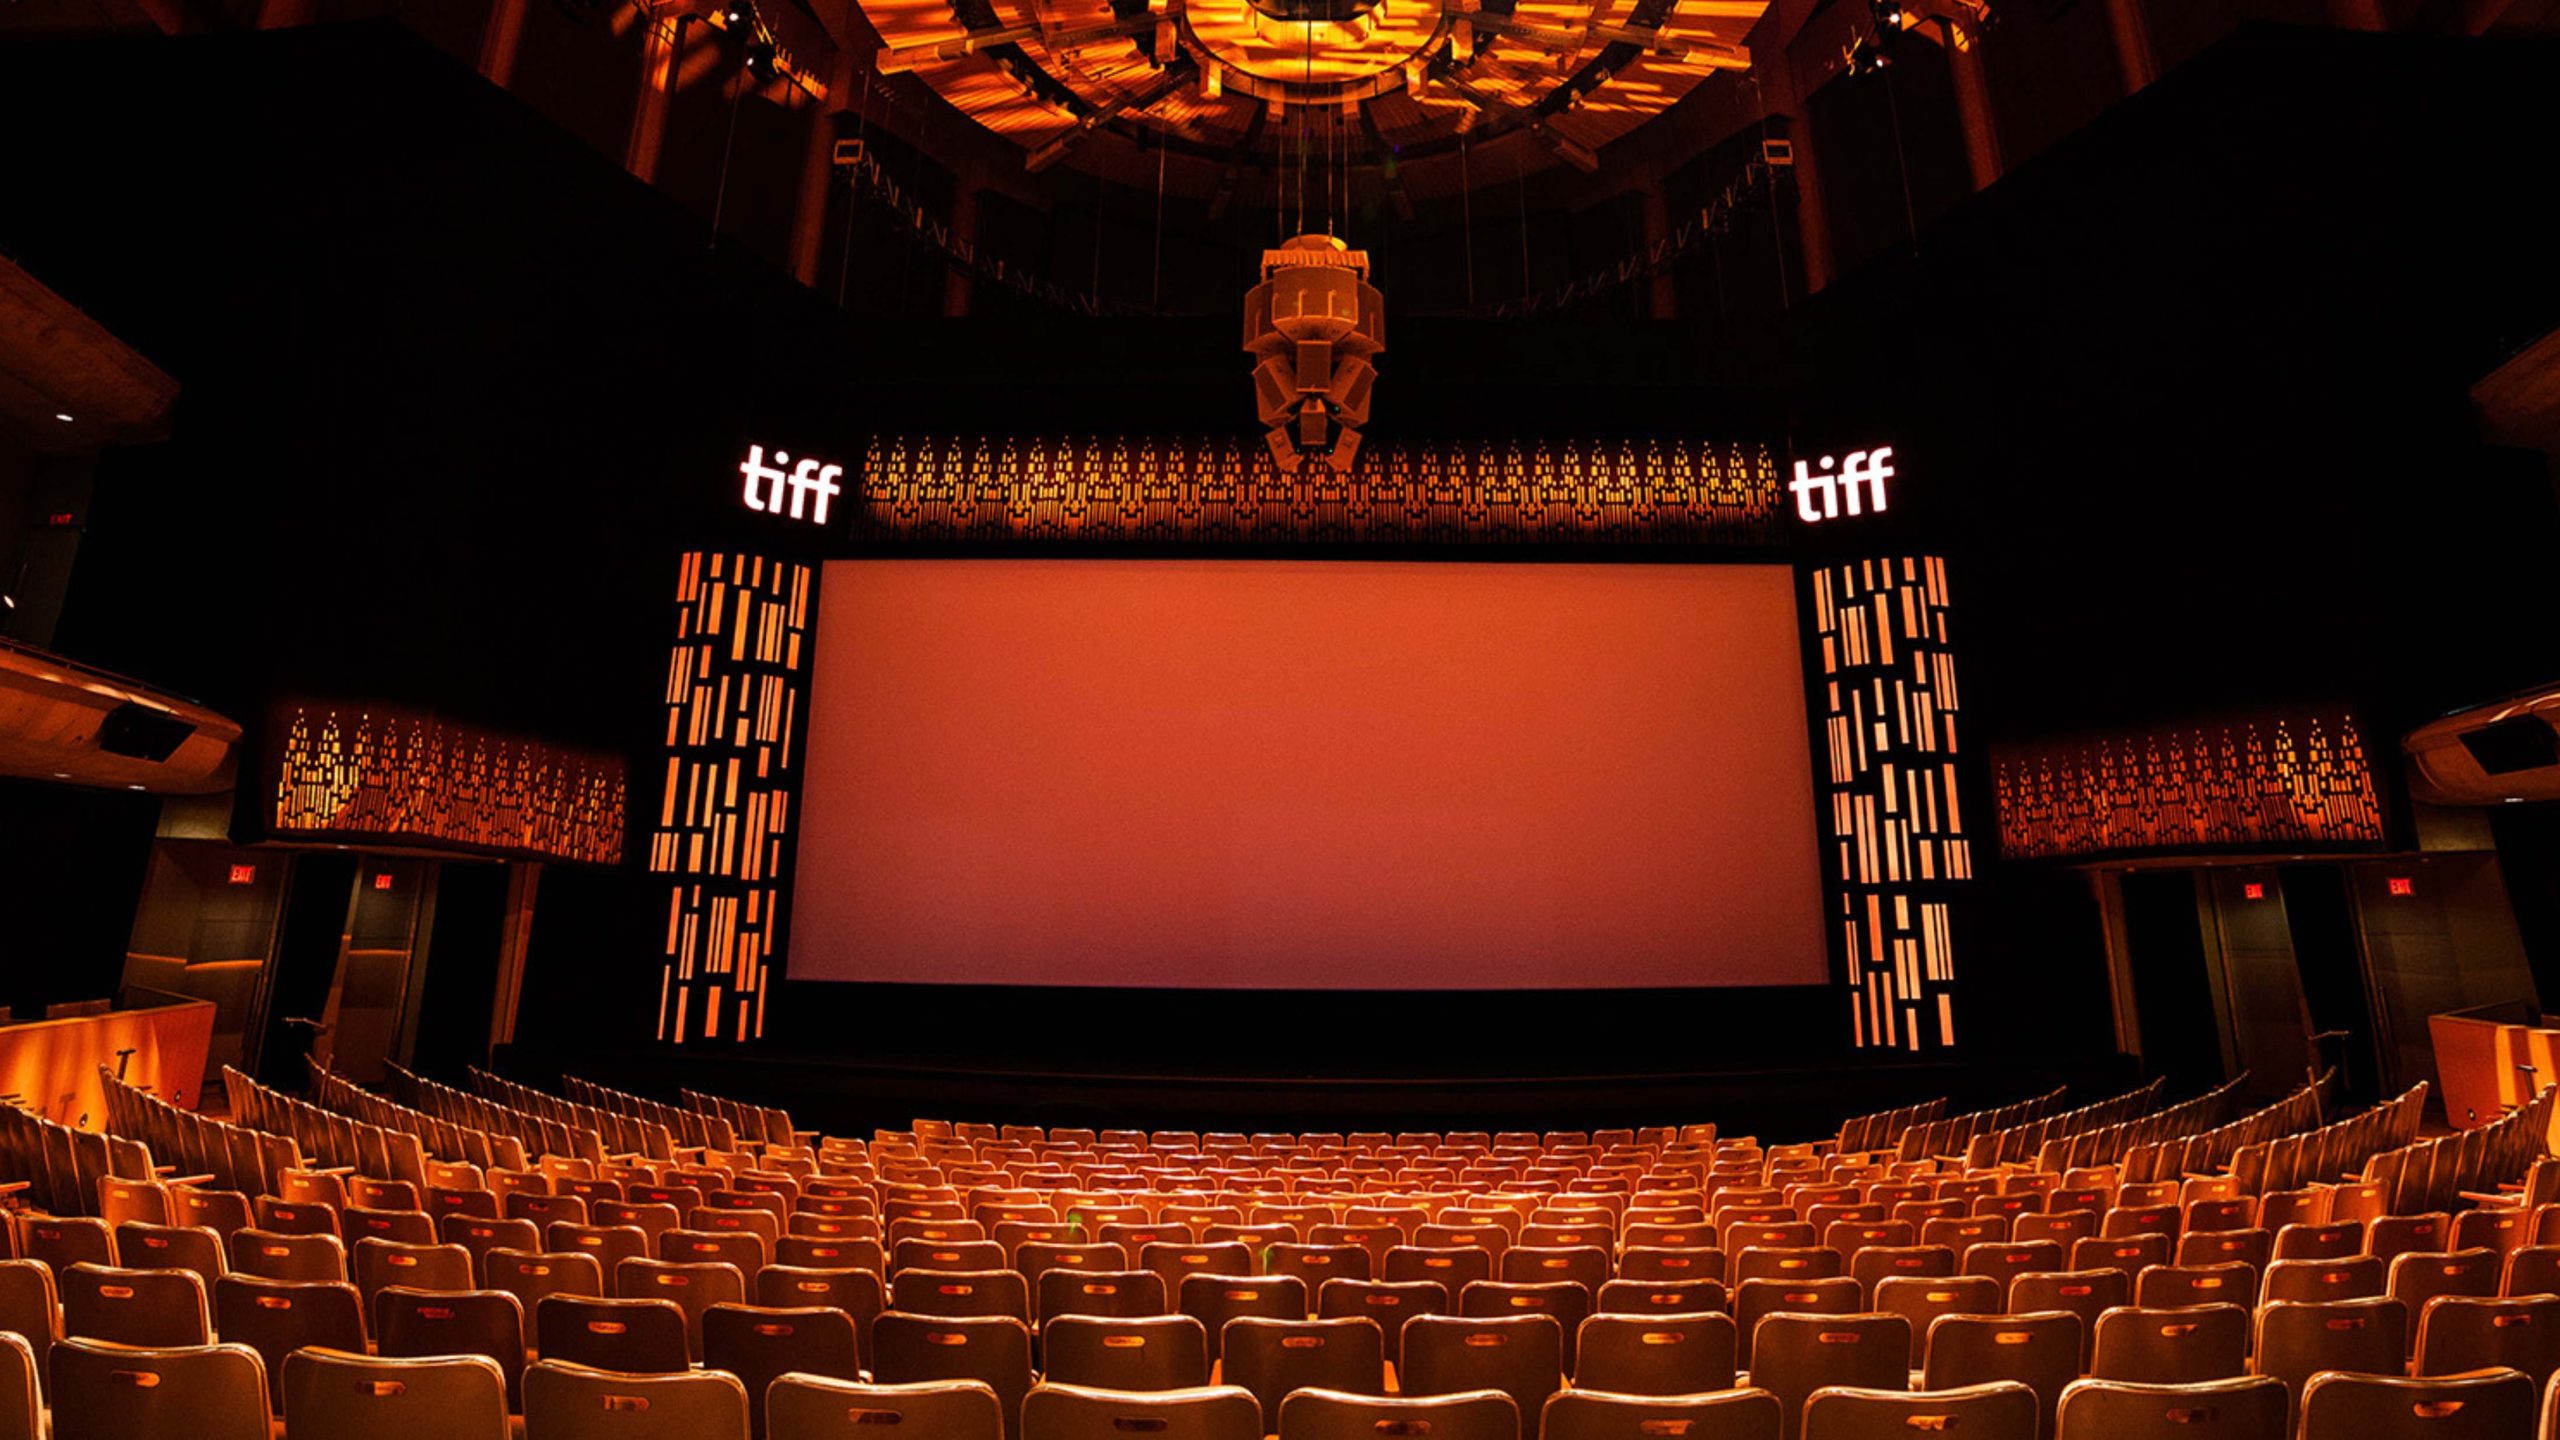 Auditorium of seats and speakers showing a glowing orange stage and TIFF branding.